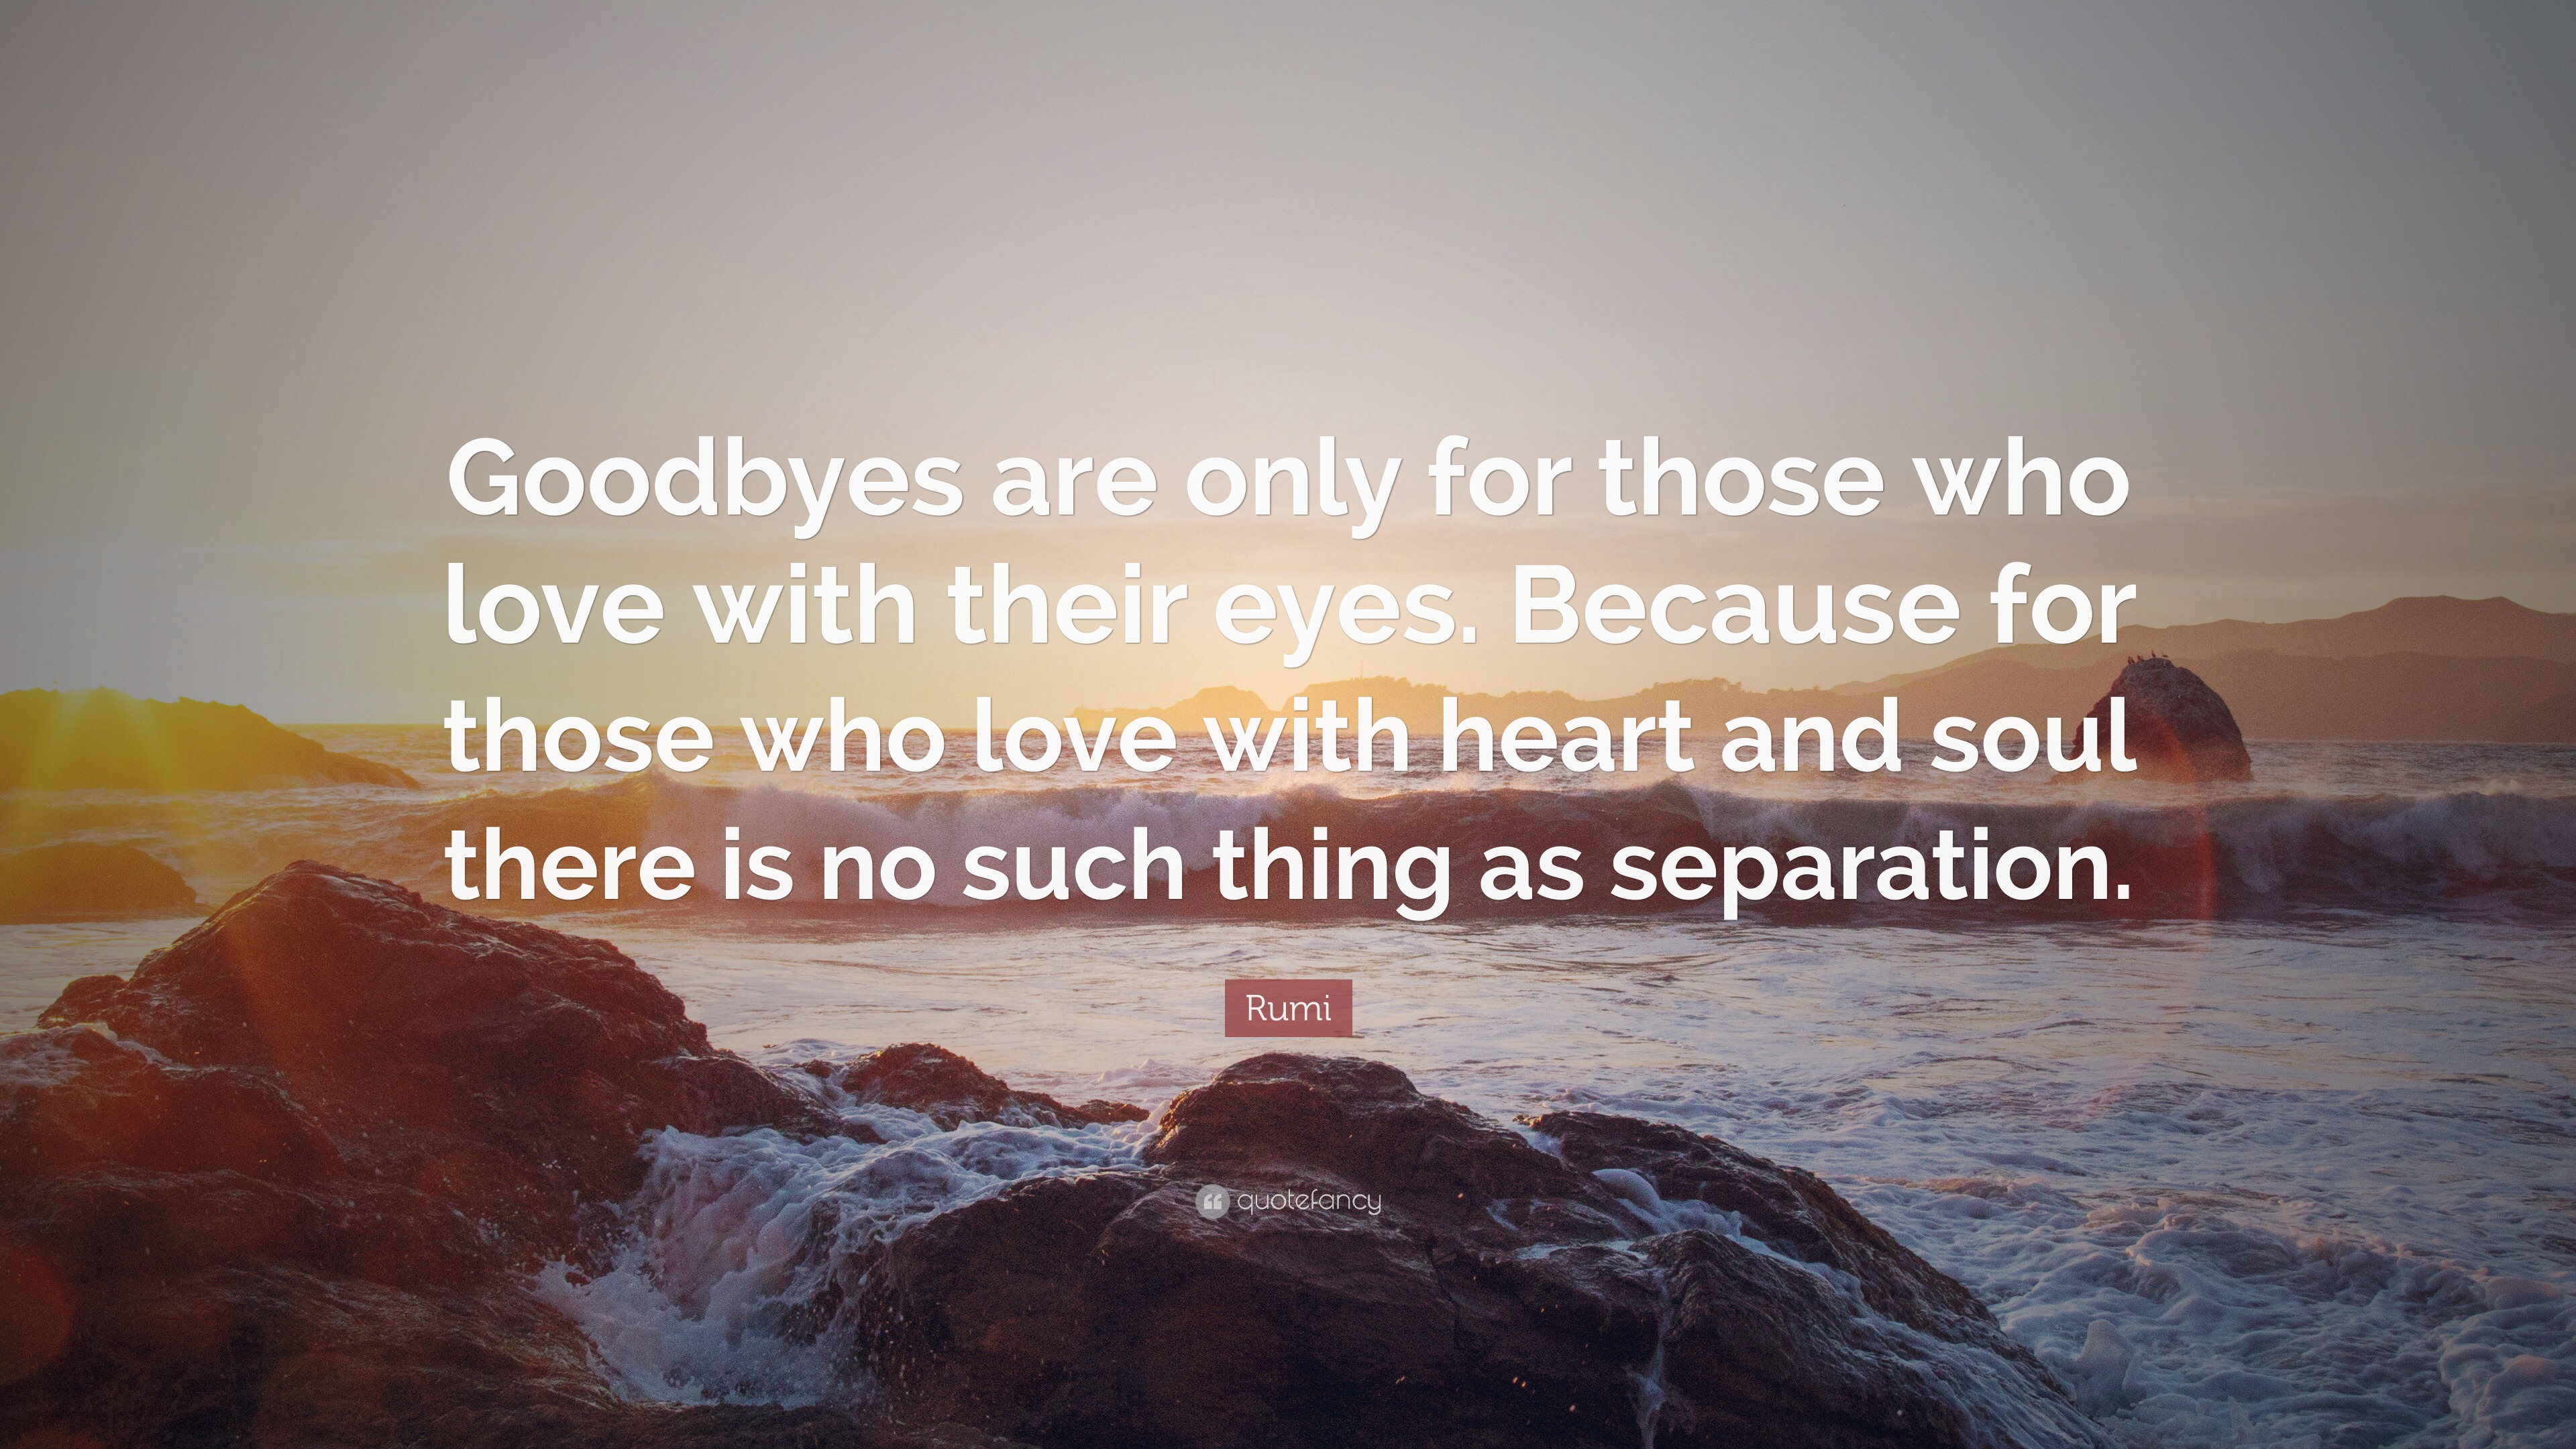 Rumi Quote: “Goodbyes are only for those who love with their eyes ...